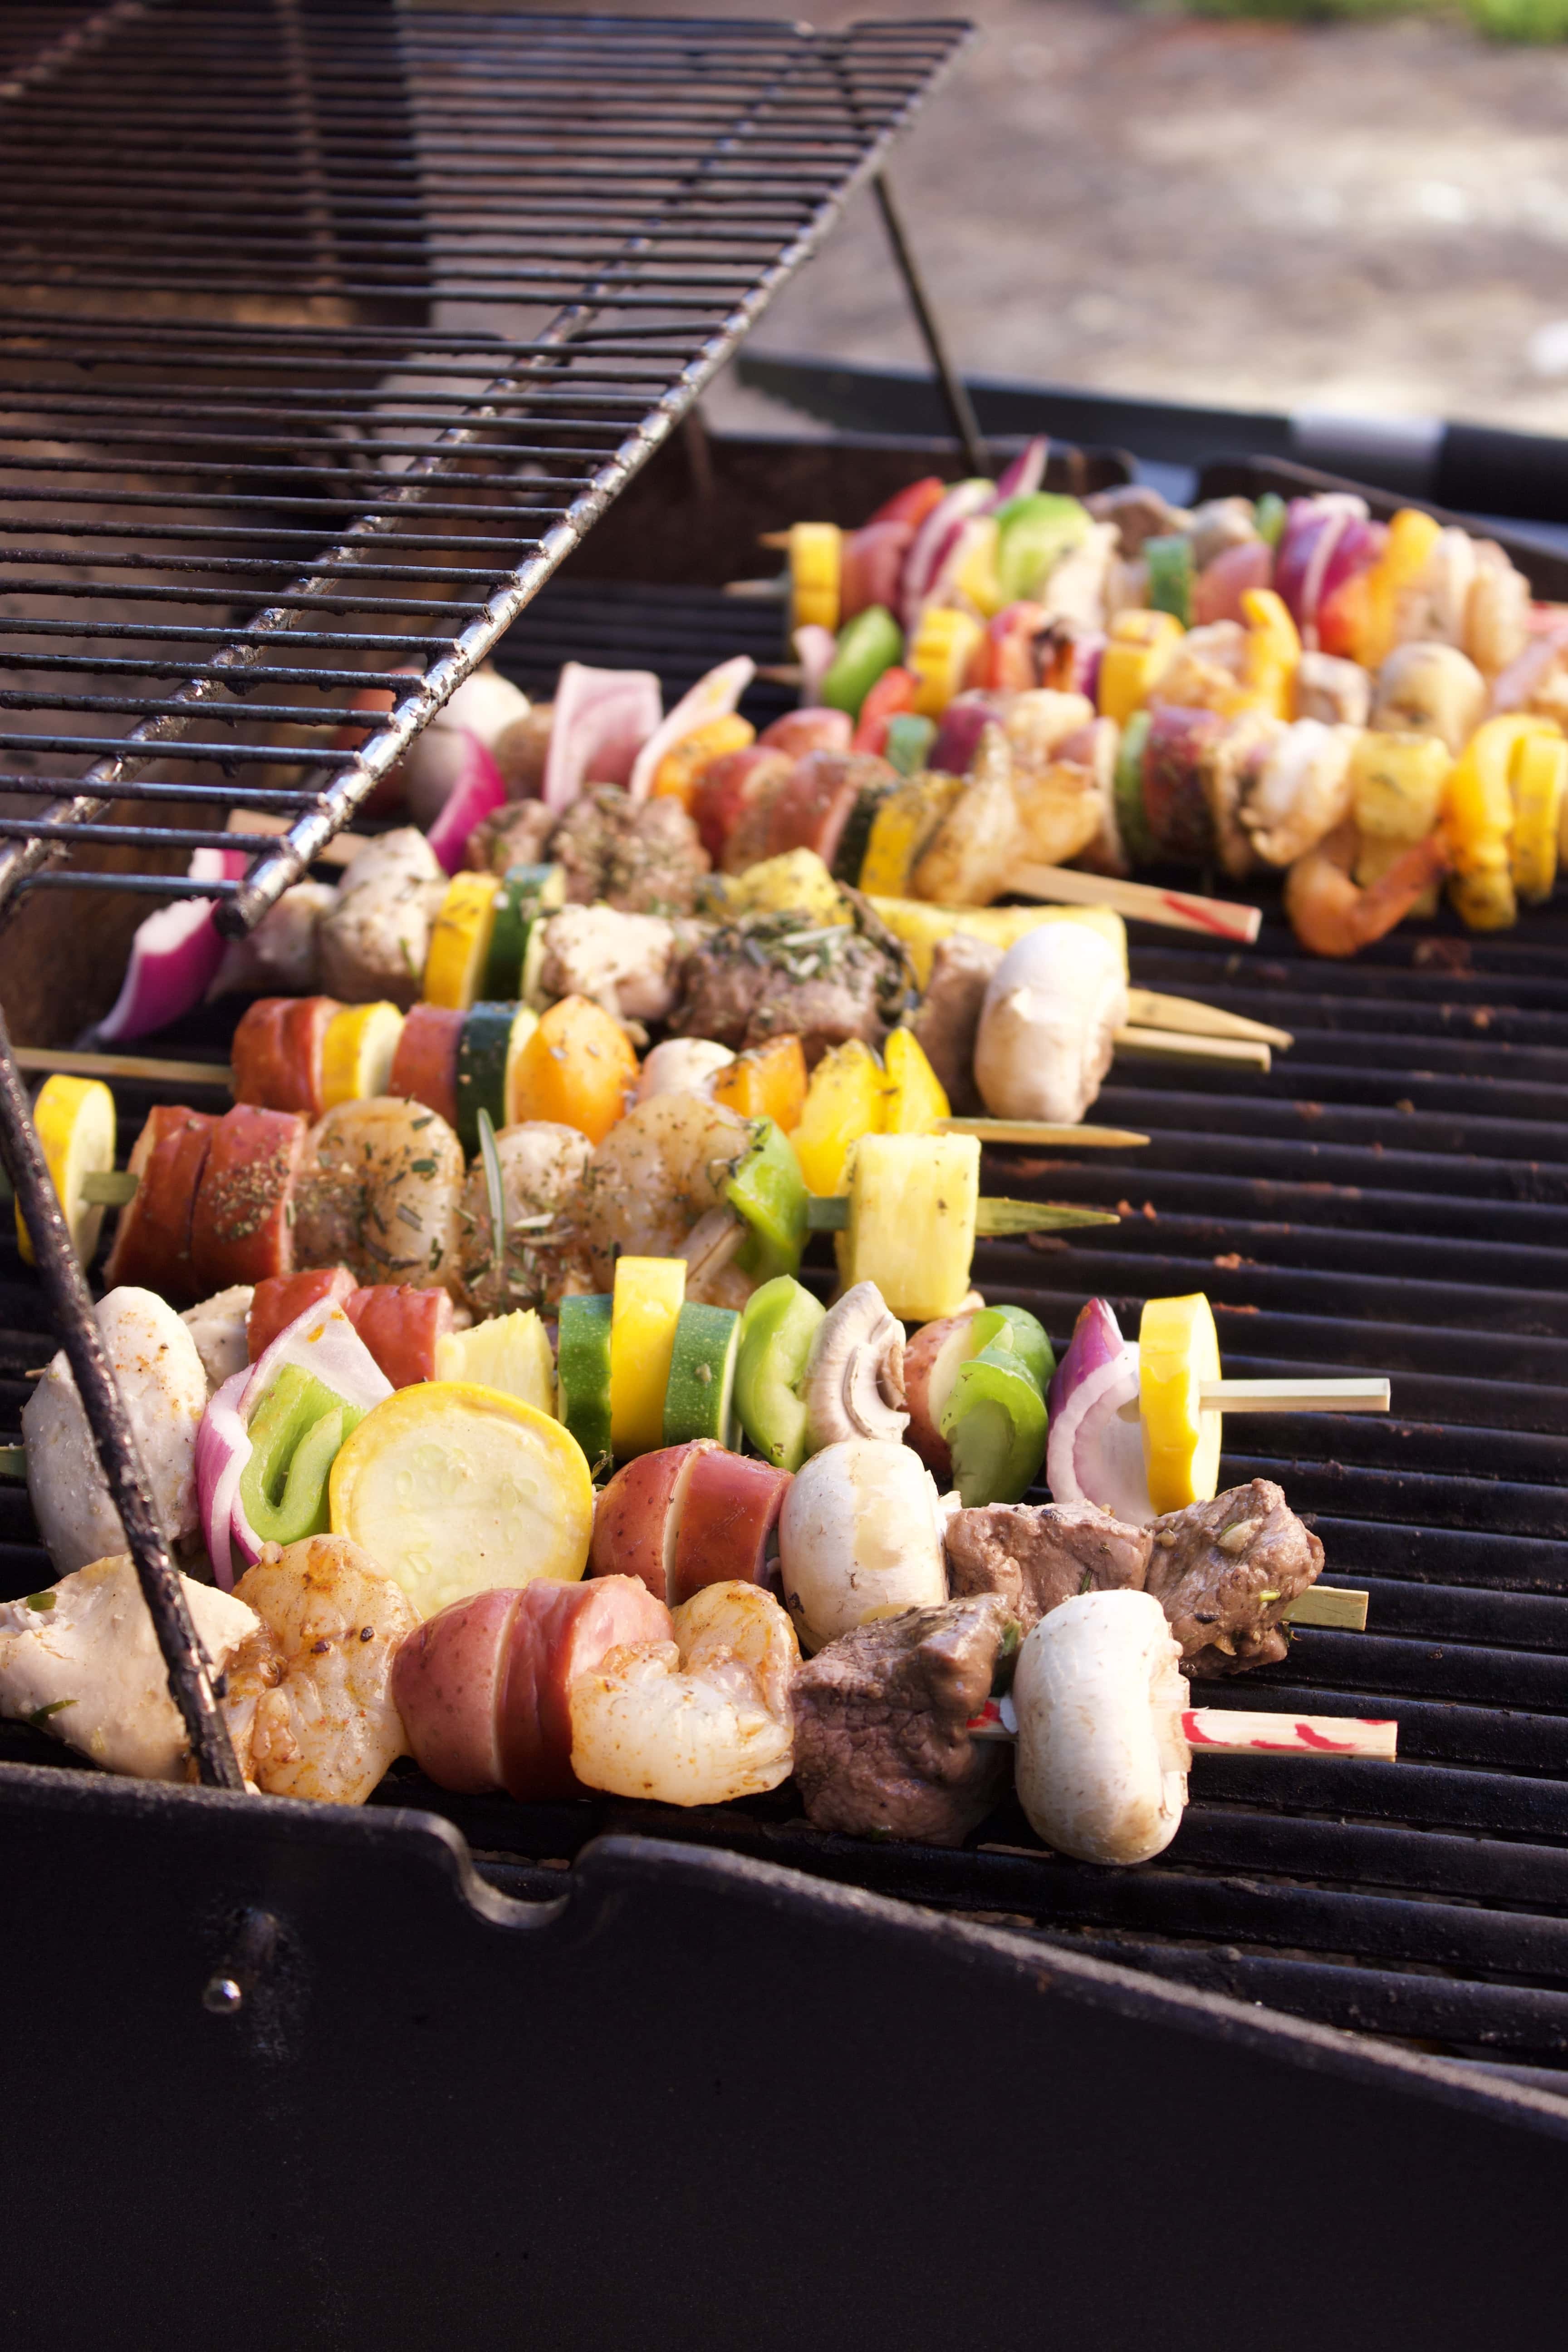 Summer skewers: Shish Kebabs are perfect grilled party fare - InForum